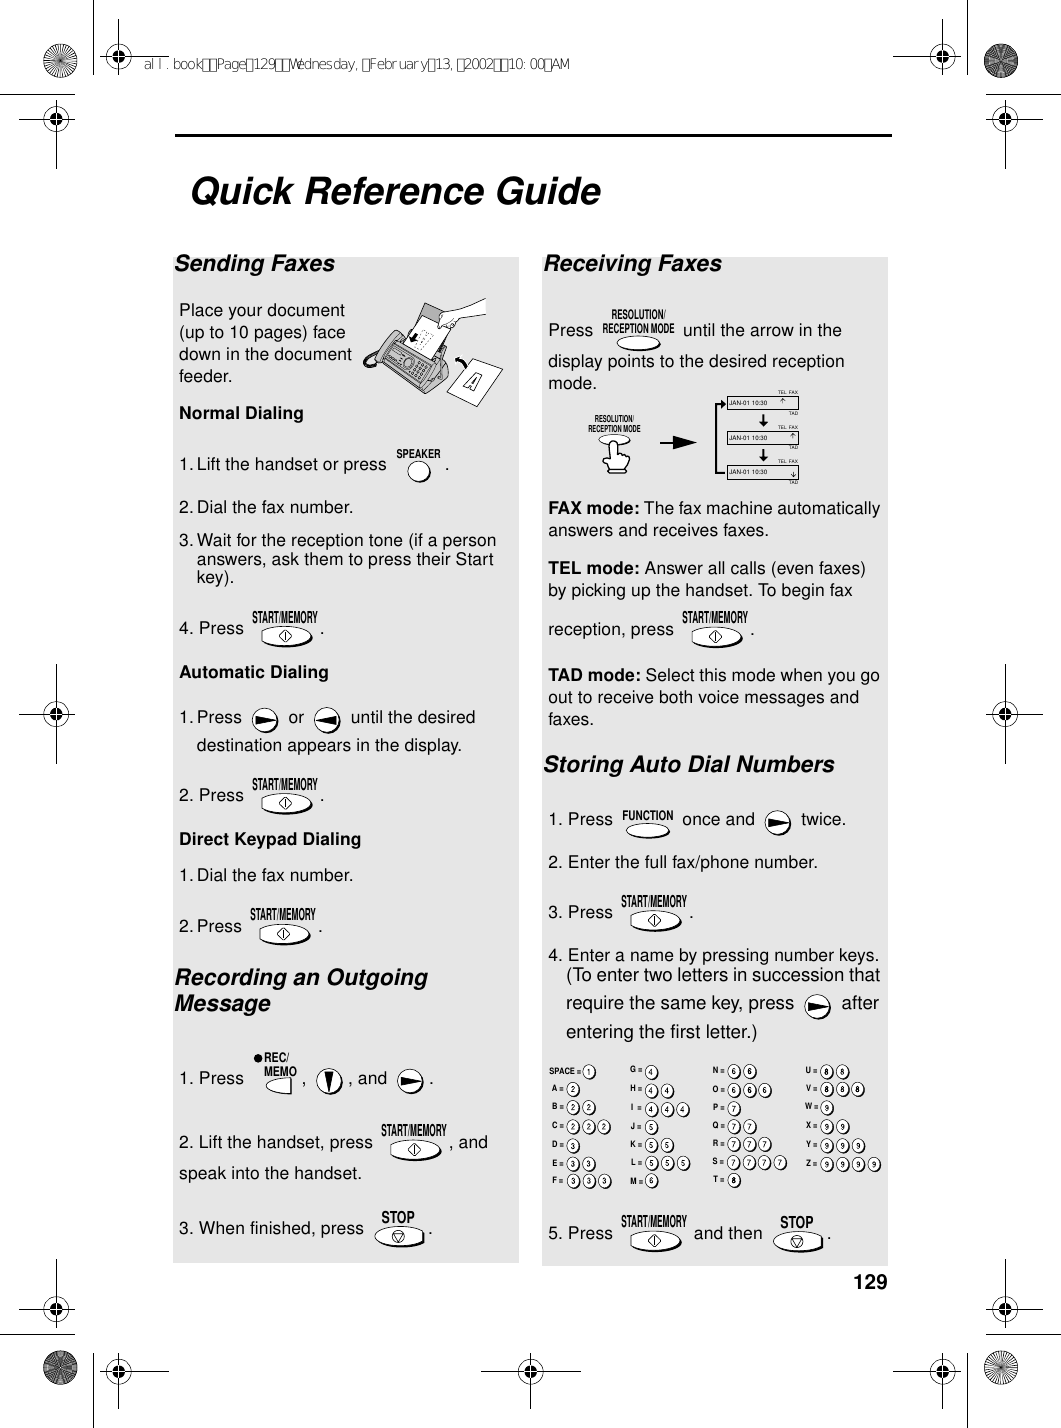 129Quick Reference GuideSending FaxesPlace your document (up to 10 pages) face down in the document feeder.Normal Dialing 1.Lift the handset or press  .2. Dial the fax number. 3. Wait for the reception tone (if a person answers, ask them to press their Start key). 4. Press  .Automatic Dialing1. Press   or   until the desired destination appears in the display.2. Press  .Direct Keypad Dialing  1. Dial the fax number. 2. Press .Recording an Outgoing Message1. Press  ,  , and  .2. Lift the handset, press  , and speak into the handset.3. When finished, press  .SPEAKERSTART/MEMORYSTART/MEMORYSTART/MEMORYREC/MEMOSTART/MEMORYSTOPReceiving FaxesPress   until the arrow in the display points to the desired reception mode.FAX mode: The fax machine automatically answers and receives faxes.TEL mode: Answer all calls (even faxes) by picking up the handset. To begin fax reception, press  .TAD mode: Select this mode when you go out to receive both voice messages and faxes.Storing Auto Dial Numbers1. Press   once and   twice.2. Enter the full fax/phone number.3. Press  .4. Enter a name by pressing number keys. (To enter two letters in succession that require the same key, press   after entering the first letter.)5. Press   and then  .RESOLUTION/RECEPTION MODESTART/MEMORYFUNCTIONSTART/MEMORYSTART/MEMORYSTOPFAXTELJAN-01 10:30FAXTELJAN-01 10:30FAXTELJAN-01 10:30TADTADTADRESOLUTION/RECEPTION MODEA =B =C =D =E =F =G =H =I  =J =K =L =M =N =O =P =Q =R =S =T =U =V =W =X =Y =Z =SPACE =all.bookPage129Wednesday,February13,200210:00AM